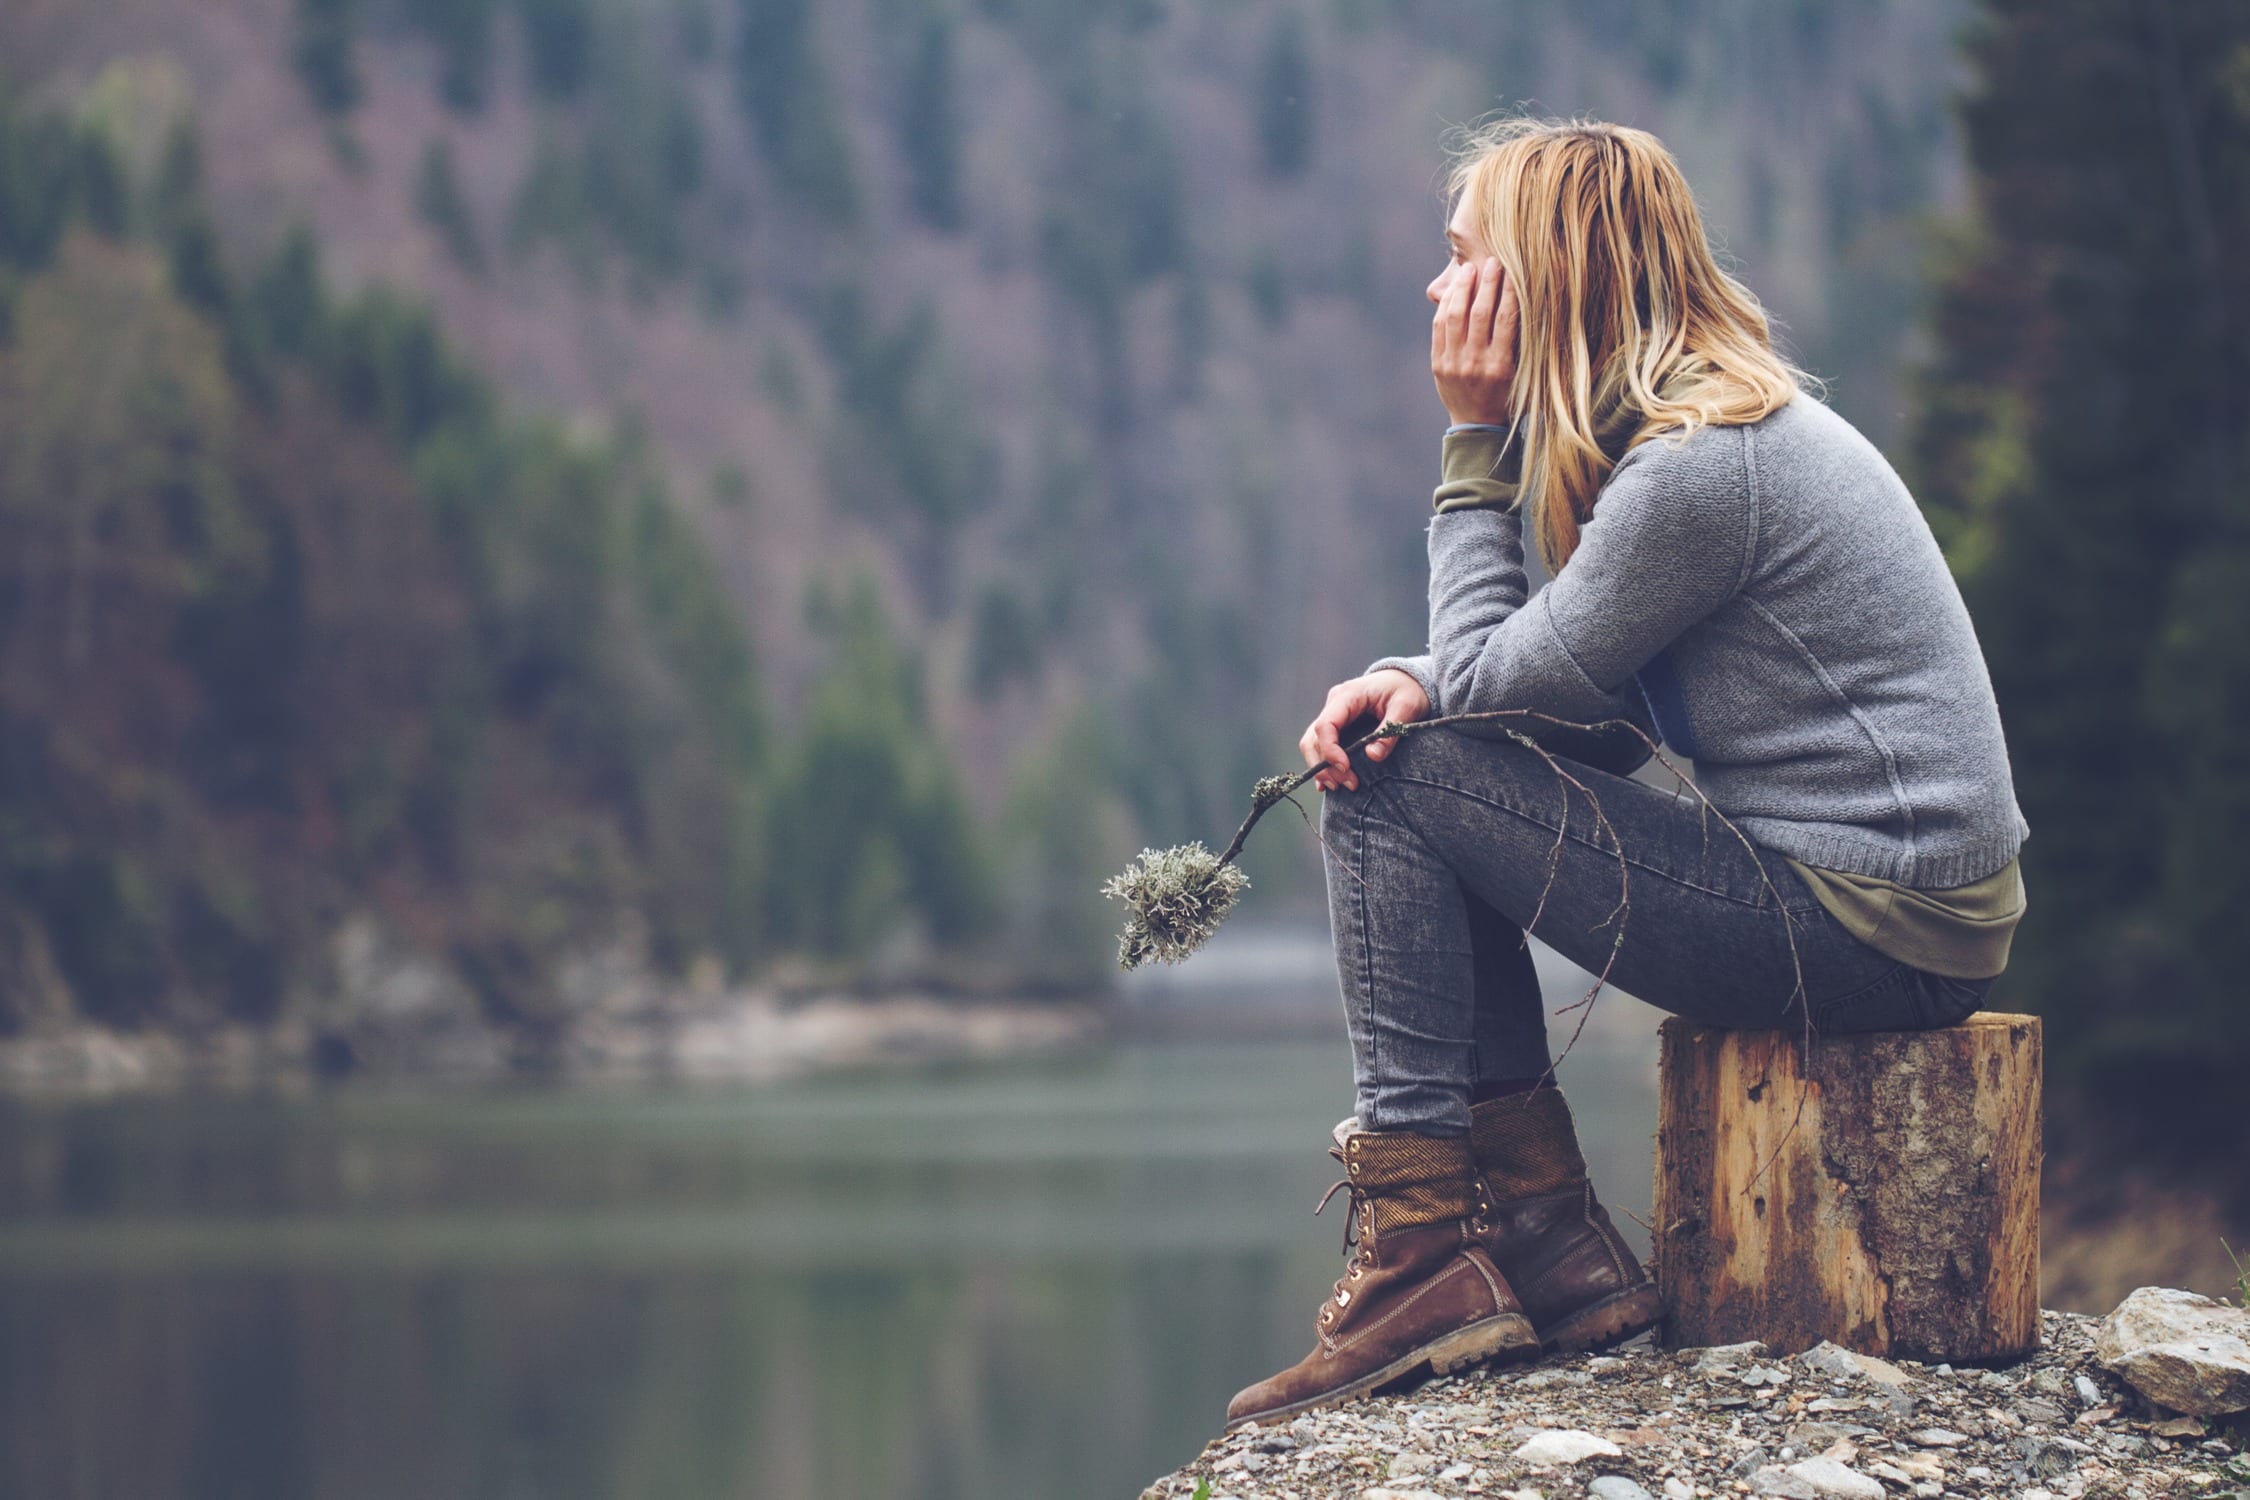 transpersonal therapy: Image of a woman sitting on a log, holding a plant and looking out over a still mountain lake.